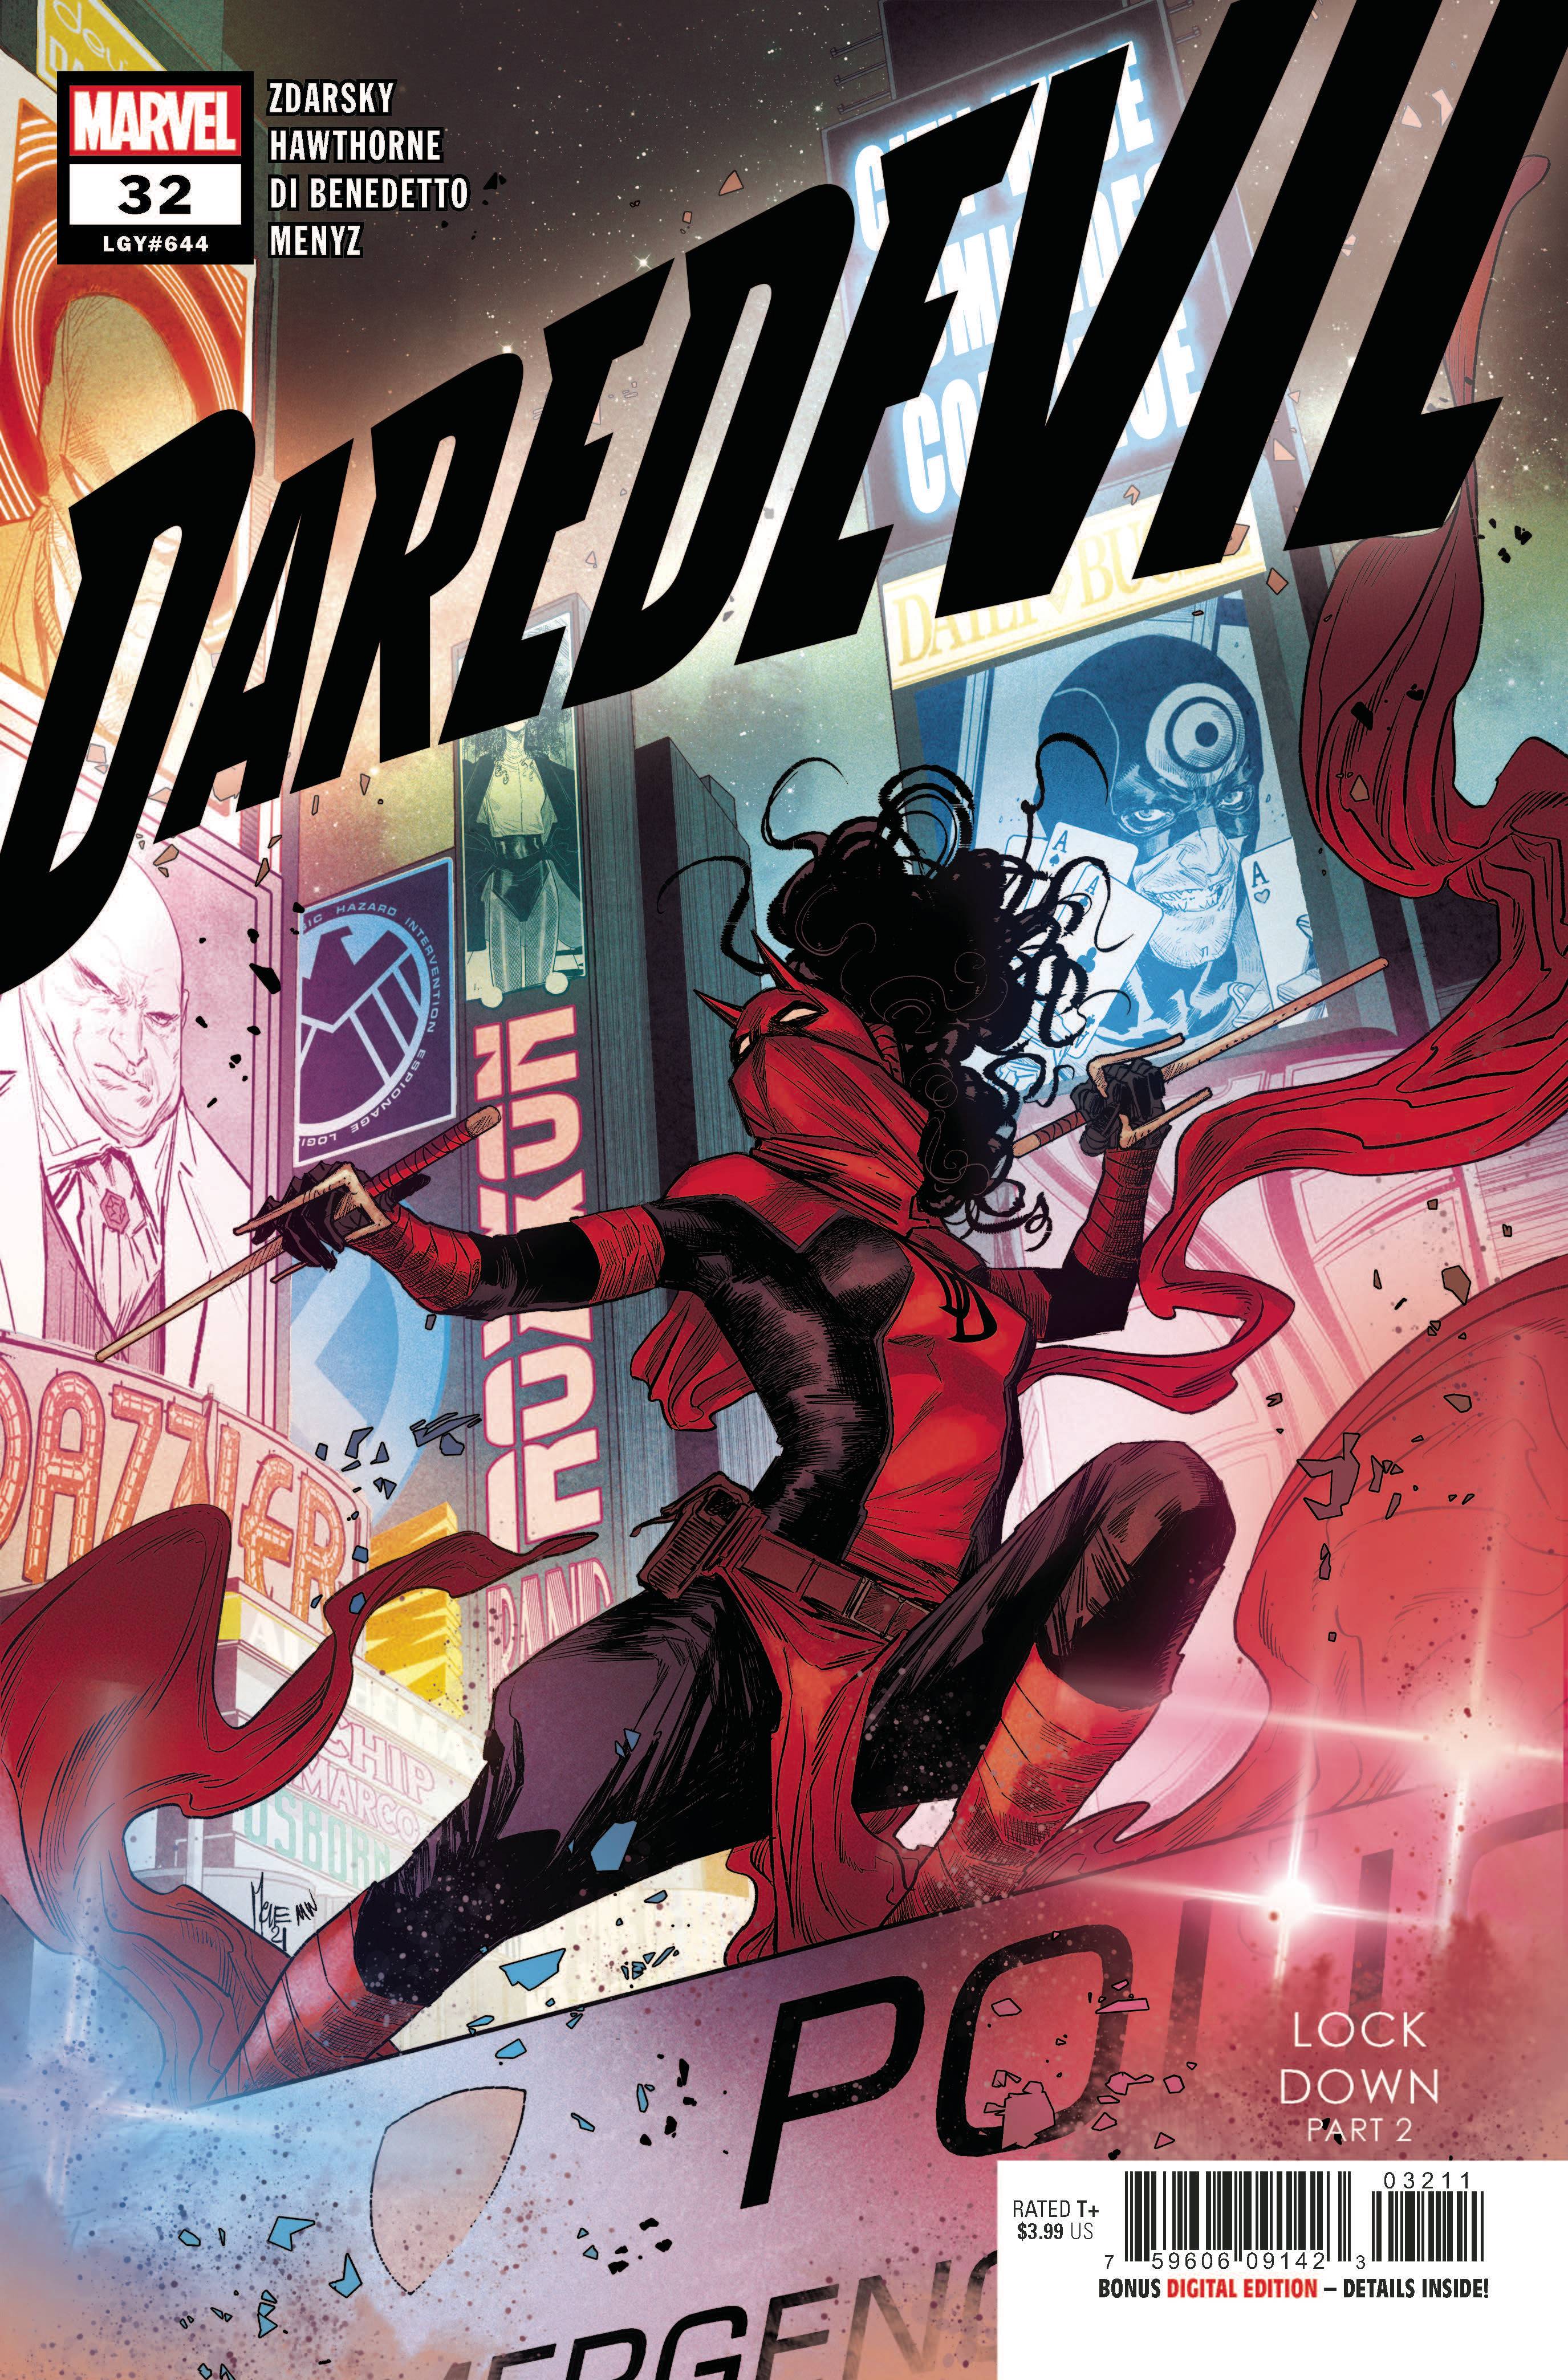 Photo of Daredevil Issue 32 comic sold by Stronghold Collectibles